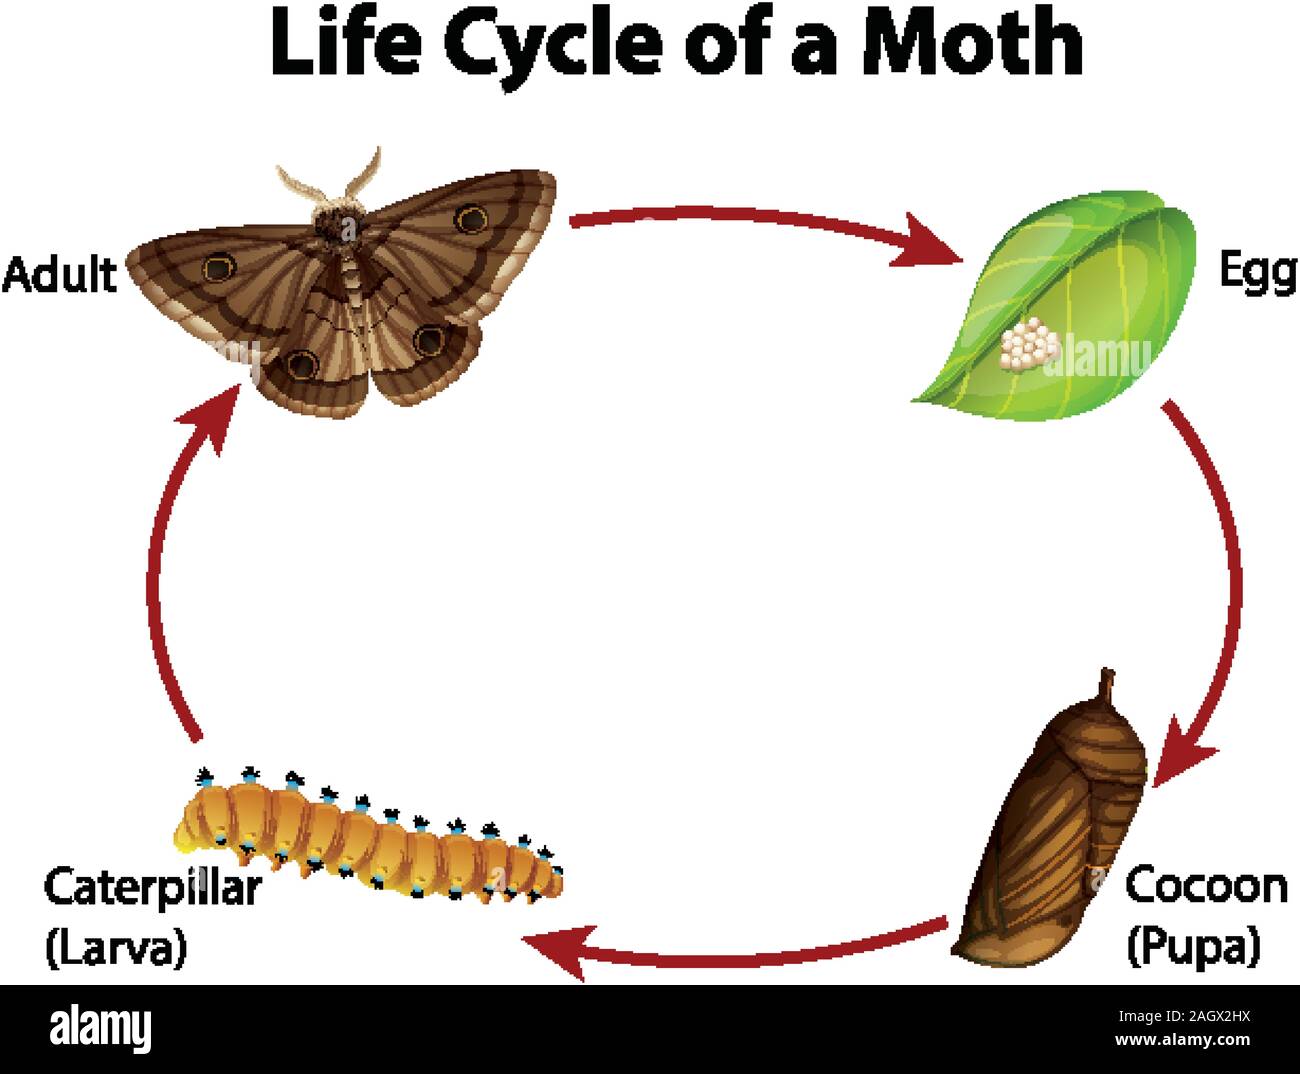 Life Cycle Of Moth